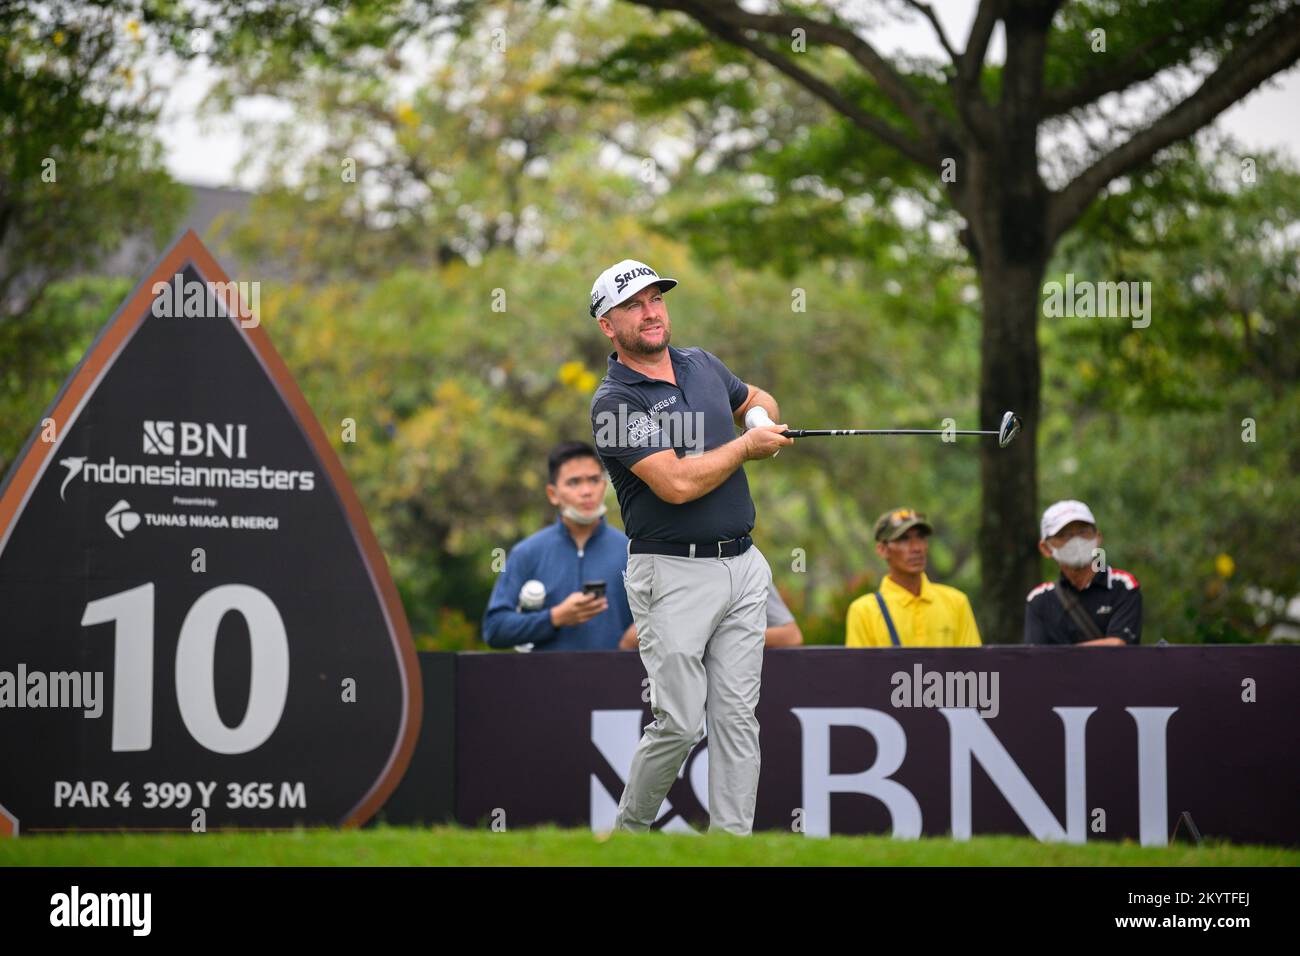 Jakarta, INDONESIA. 02nd December, 2022. Graeme McDowell of NORTHERN IRELAND tees off at hole 10 during the 2nd round the BNI Indonesian Masters at Royale Jakarta Golf Club in Jakarta, INDONESIA. McDowell would close out with a five-under 67 to take a share of the eighth position on 7-under par. Credit: Jason Butler/Alamy Live News. Stock Photo